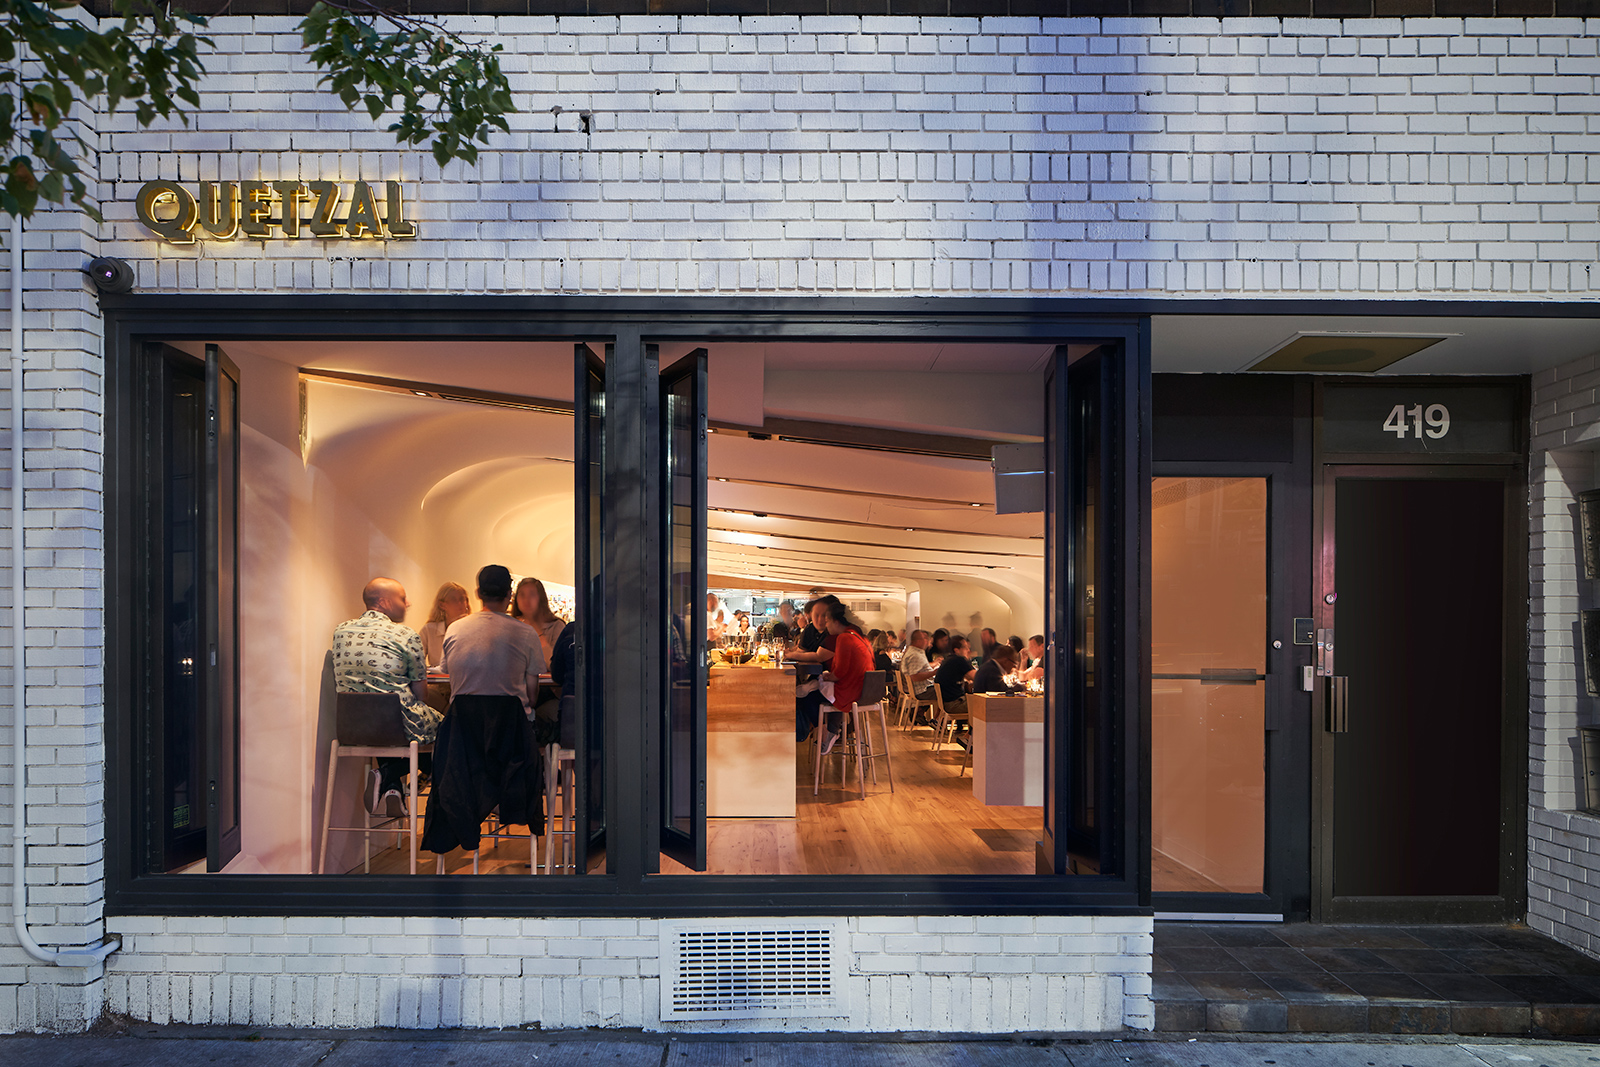 Toronto restaurant Quetzal pays homage to the markets of Mexico